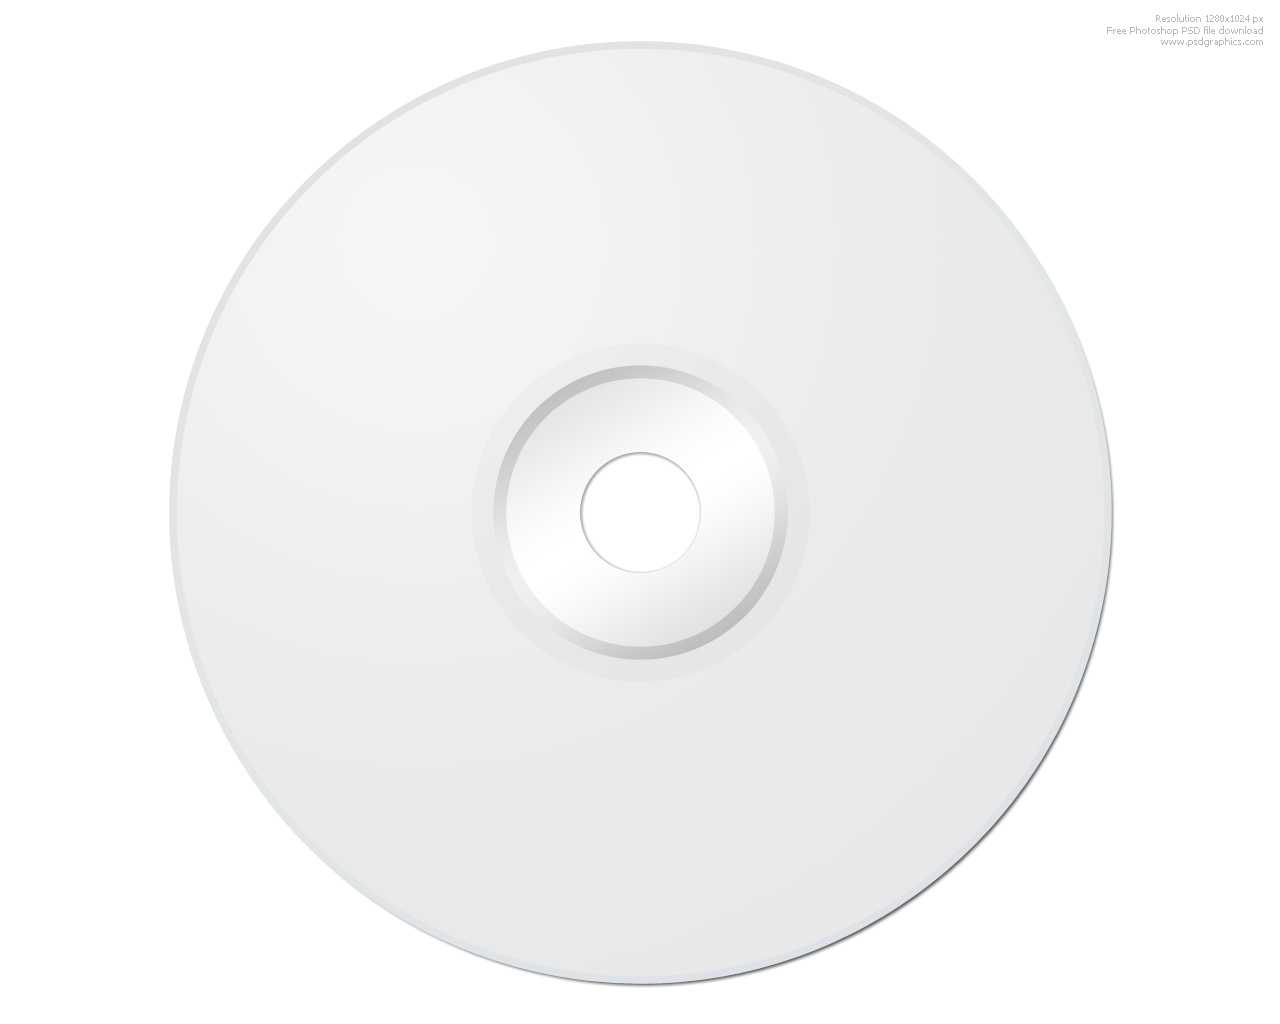 memorex-cd-label-template-word-free-download-teplates-for-throughout-blank-cd-template-word